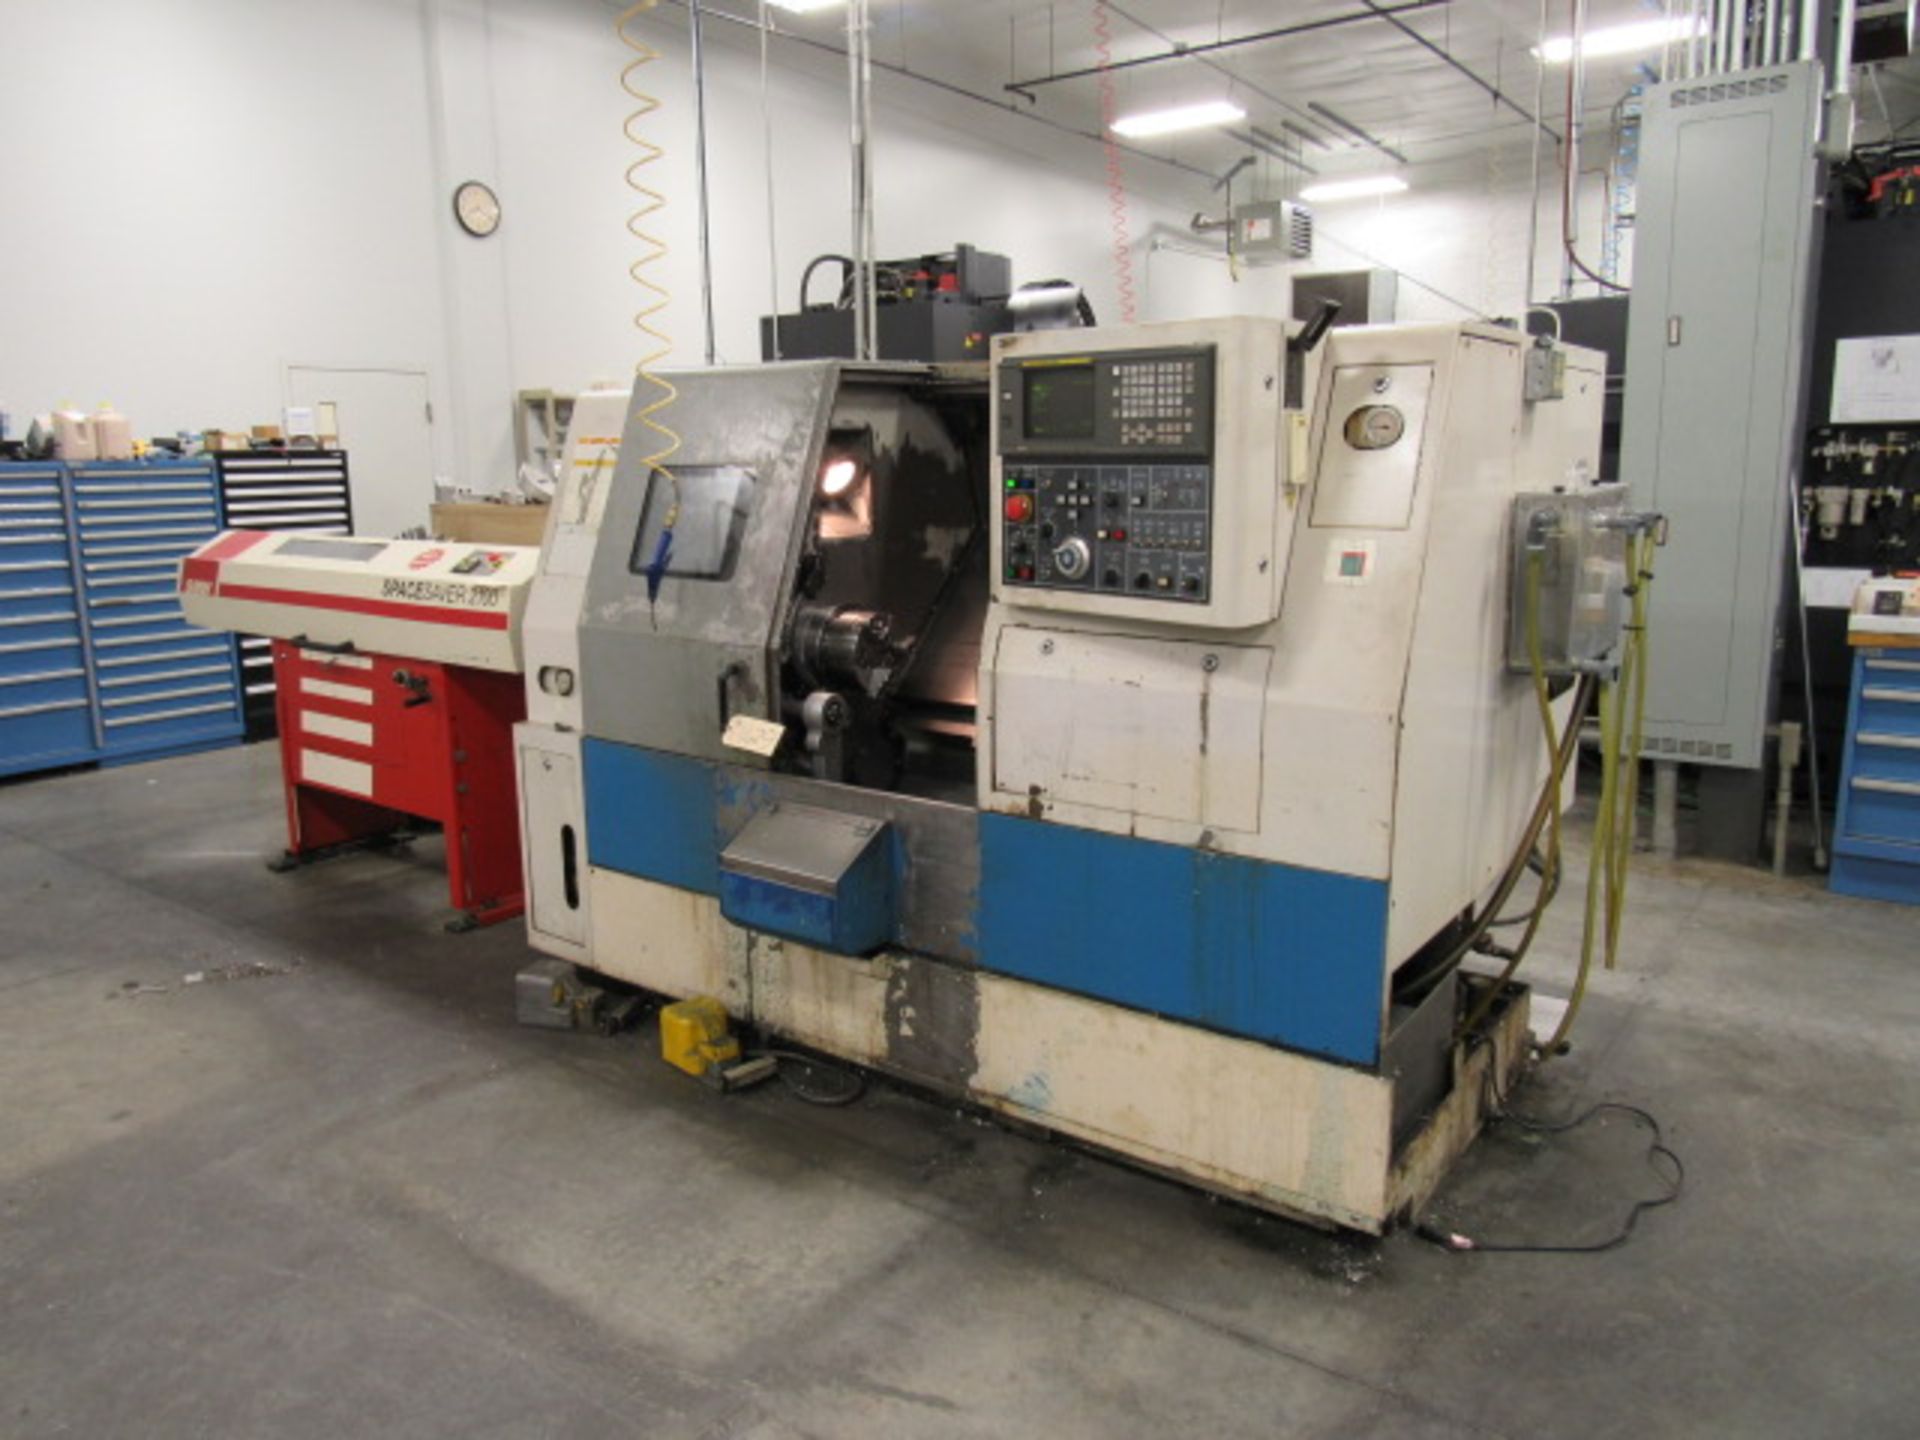 Daewoo Puma 200C CNC Turning Centers with 8'' 3-Jaw Chucks, 21'' Swing x 26.3'' Centers, Spindle - Image 6 of 8